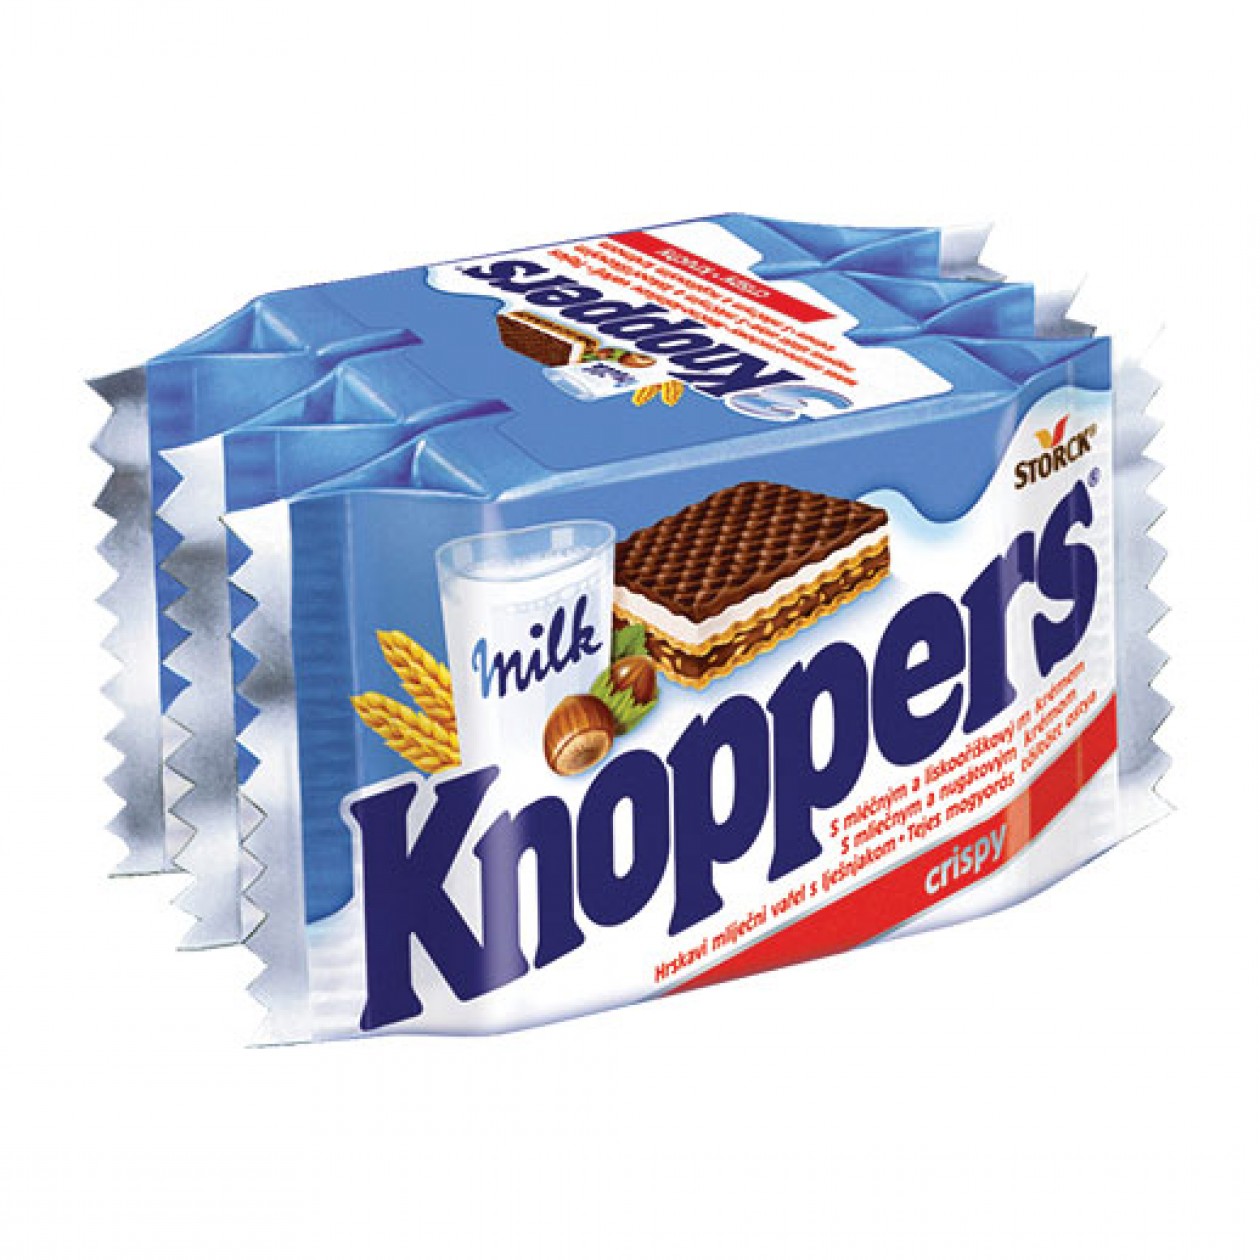 Knoppers Storck Chocolate Wafers 24x75gr (3 pack)